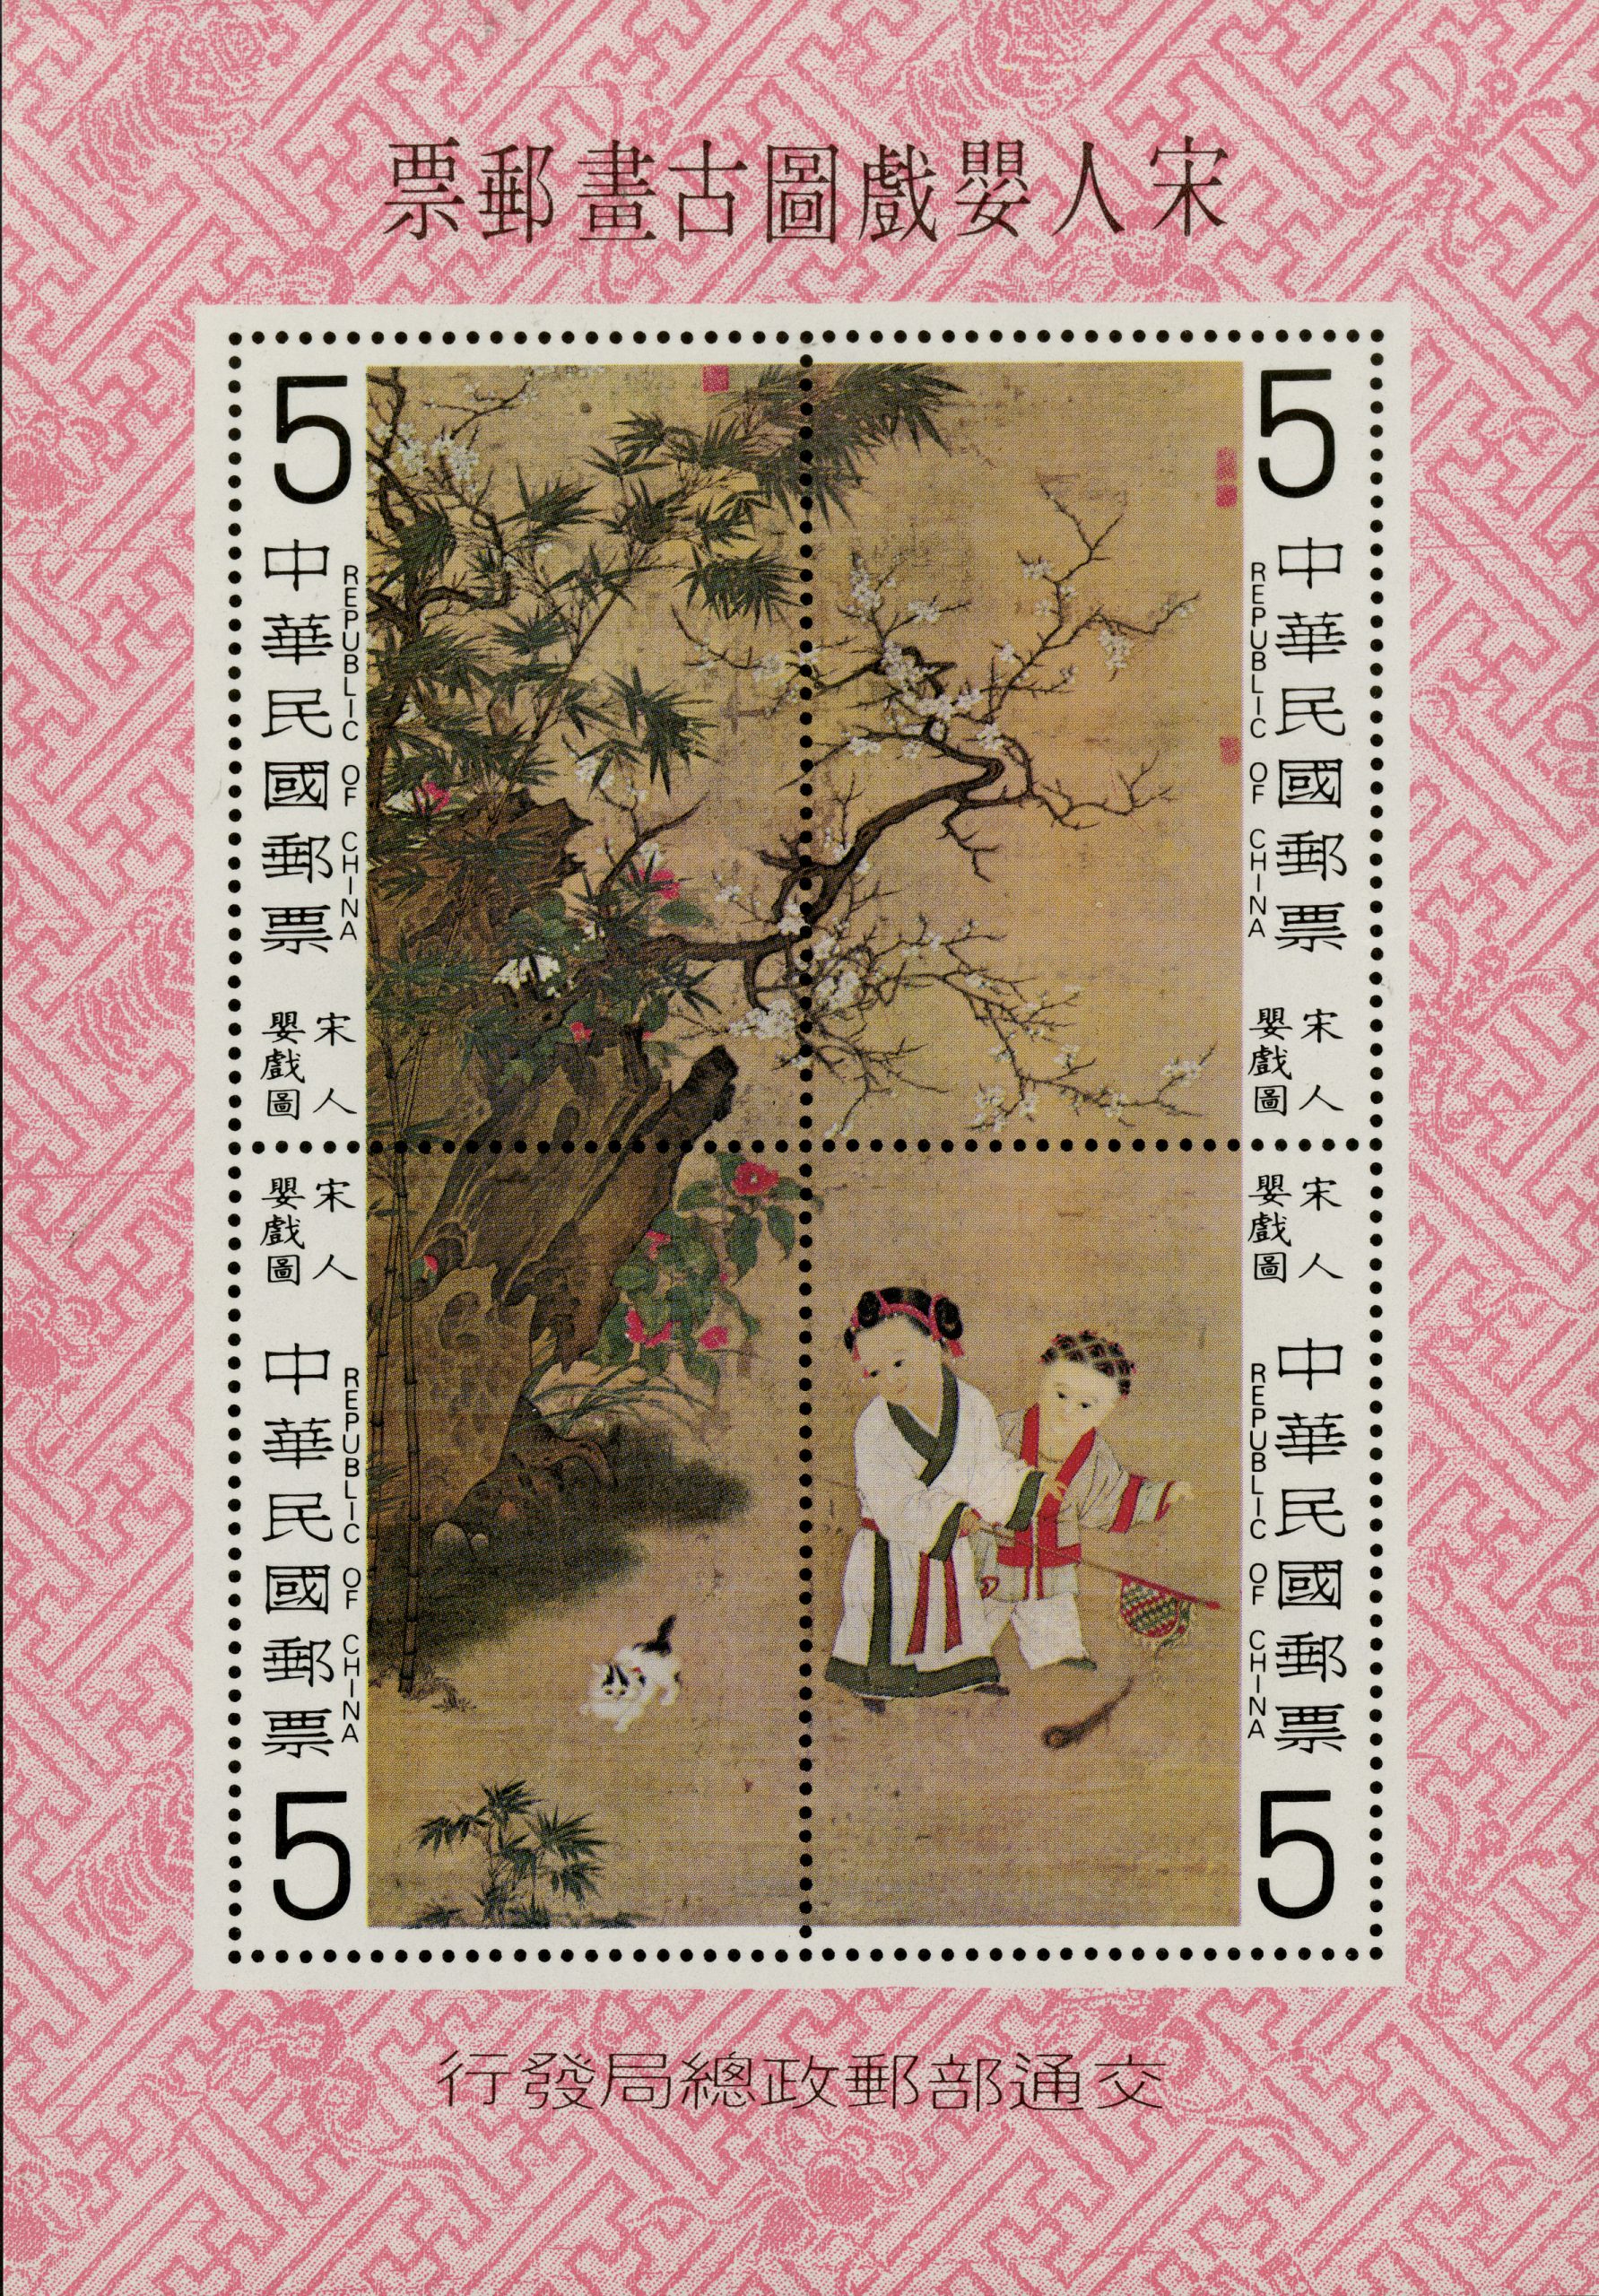 Stamp sheet featuring an ancient painting of two children playing with a cat outdoors